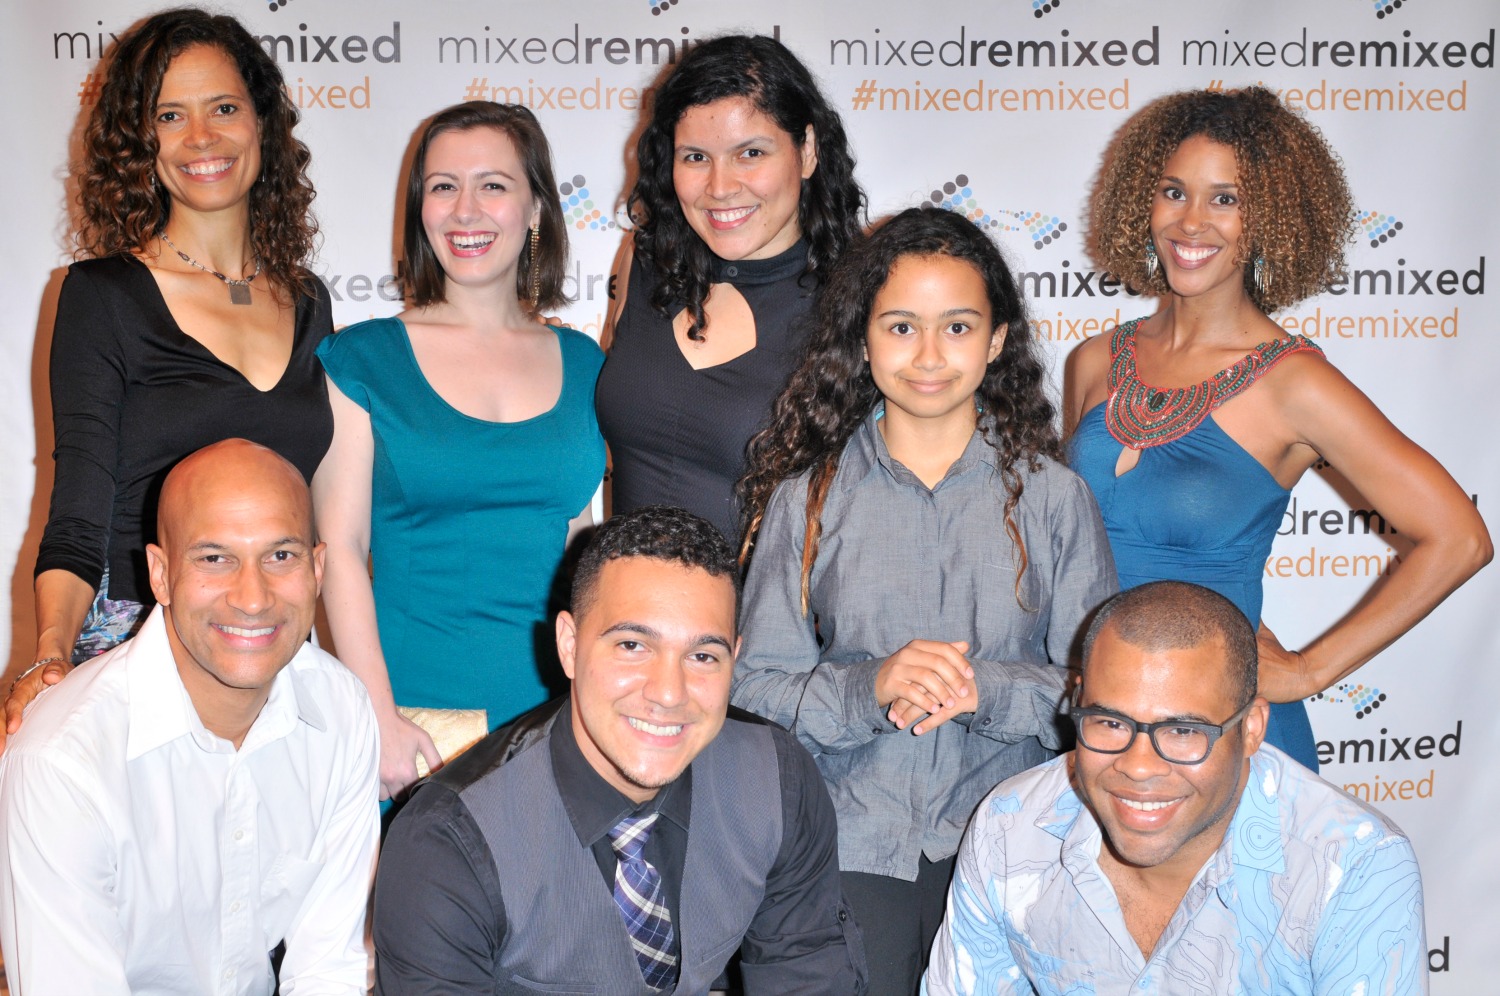 Performers at Mixed Remixed Festival 2014